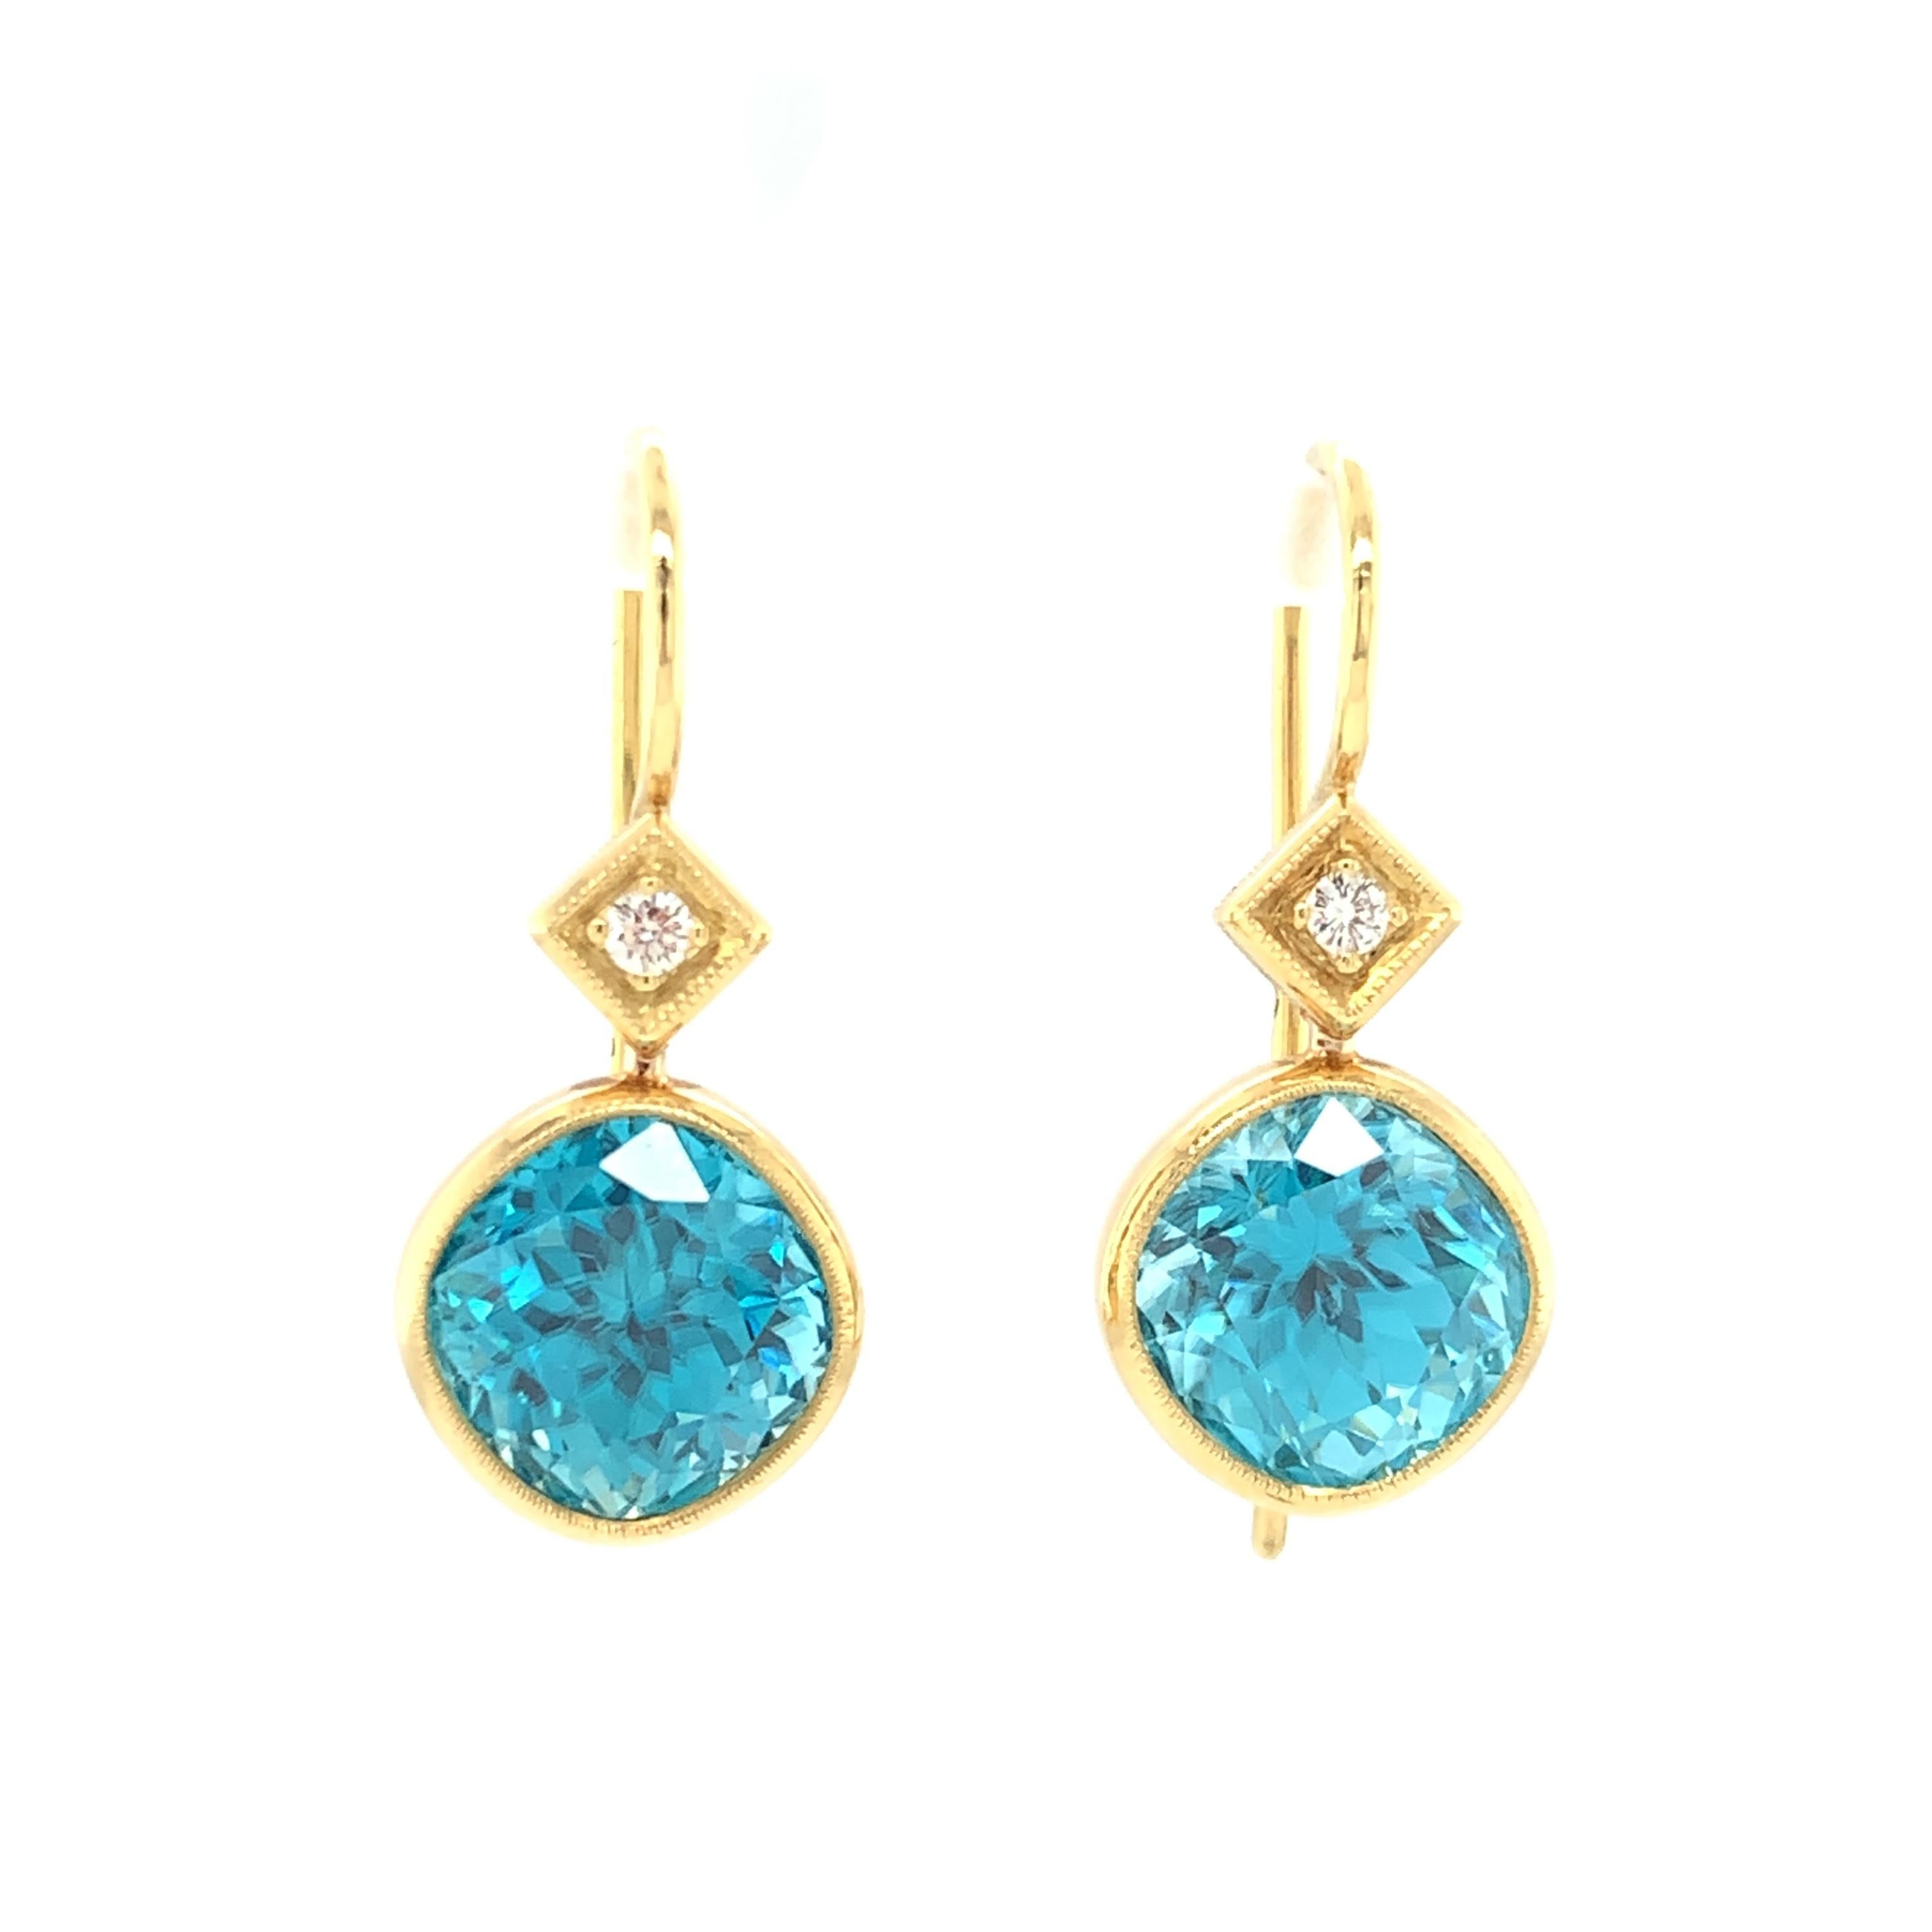 These neon-blue, turquoise color, natural zircons are sure to light up your face and help you sparkle day and night! The bezel setting and elegant drop design are a flattering and easy-to-wear European style; a real 